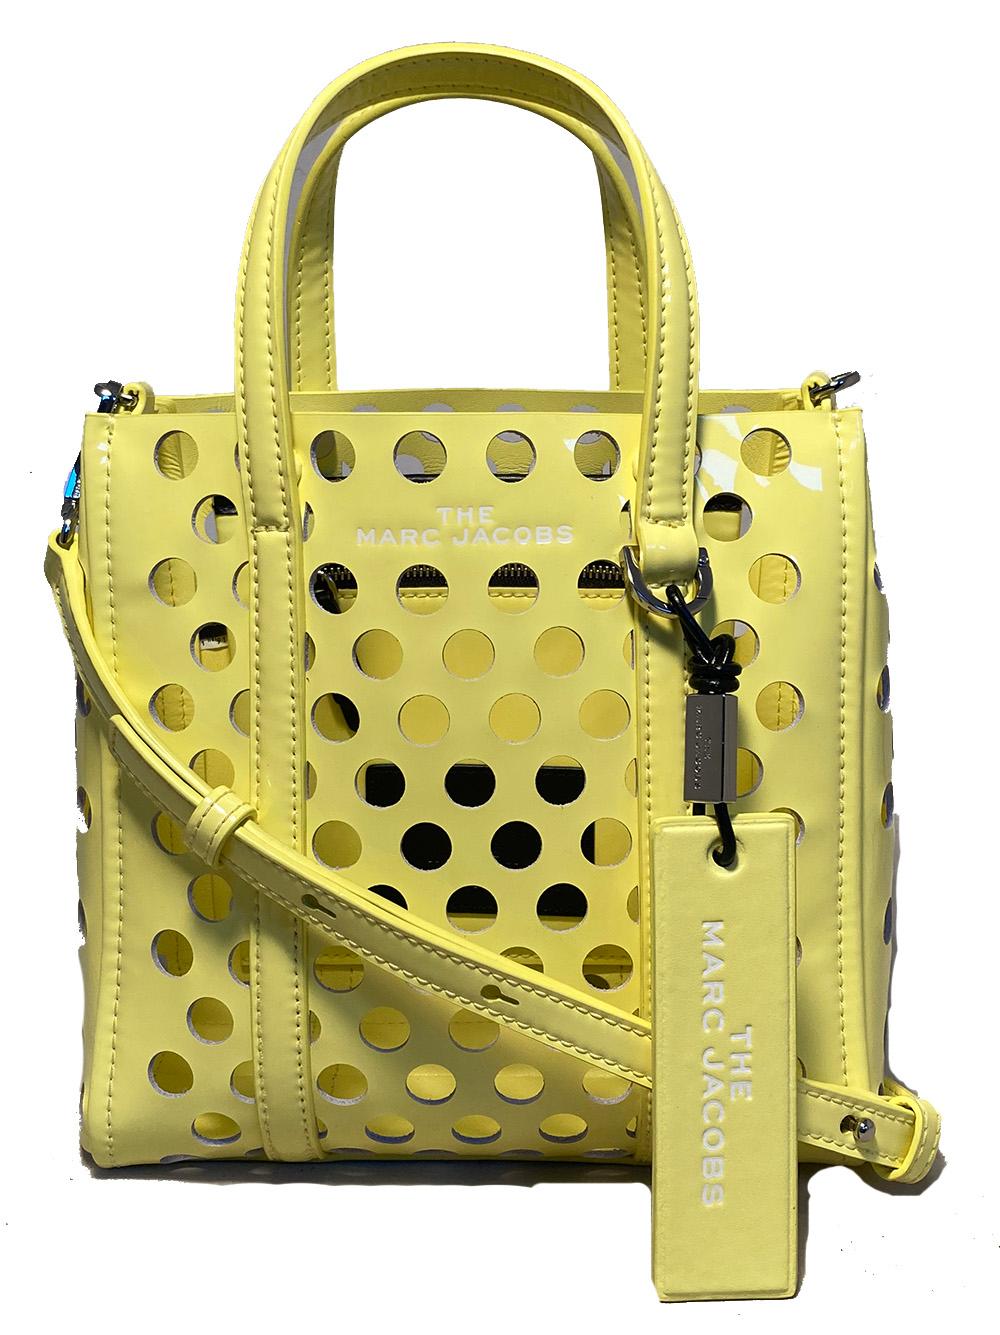 Marc Jacobs The Tag 21 Perforated Leather Tote in New With Tags condition. never used. Unique perforated holey neon yellow patent leather with multiple accessories including a removable multi tonal metal chain shoulder strap, matching removable